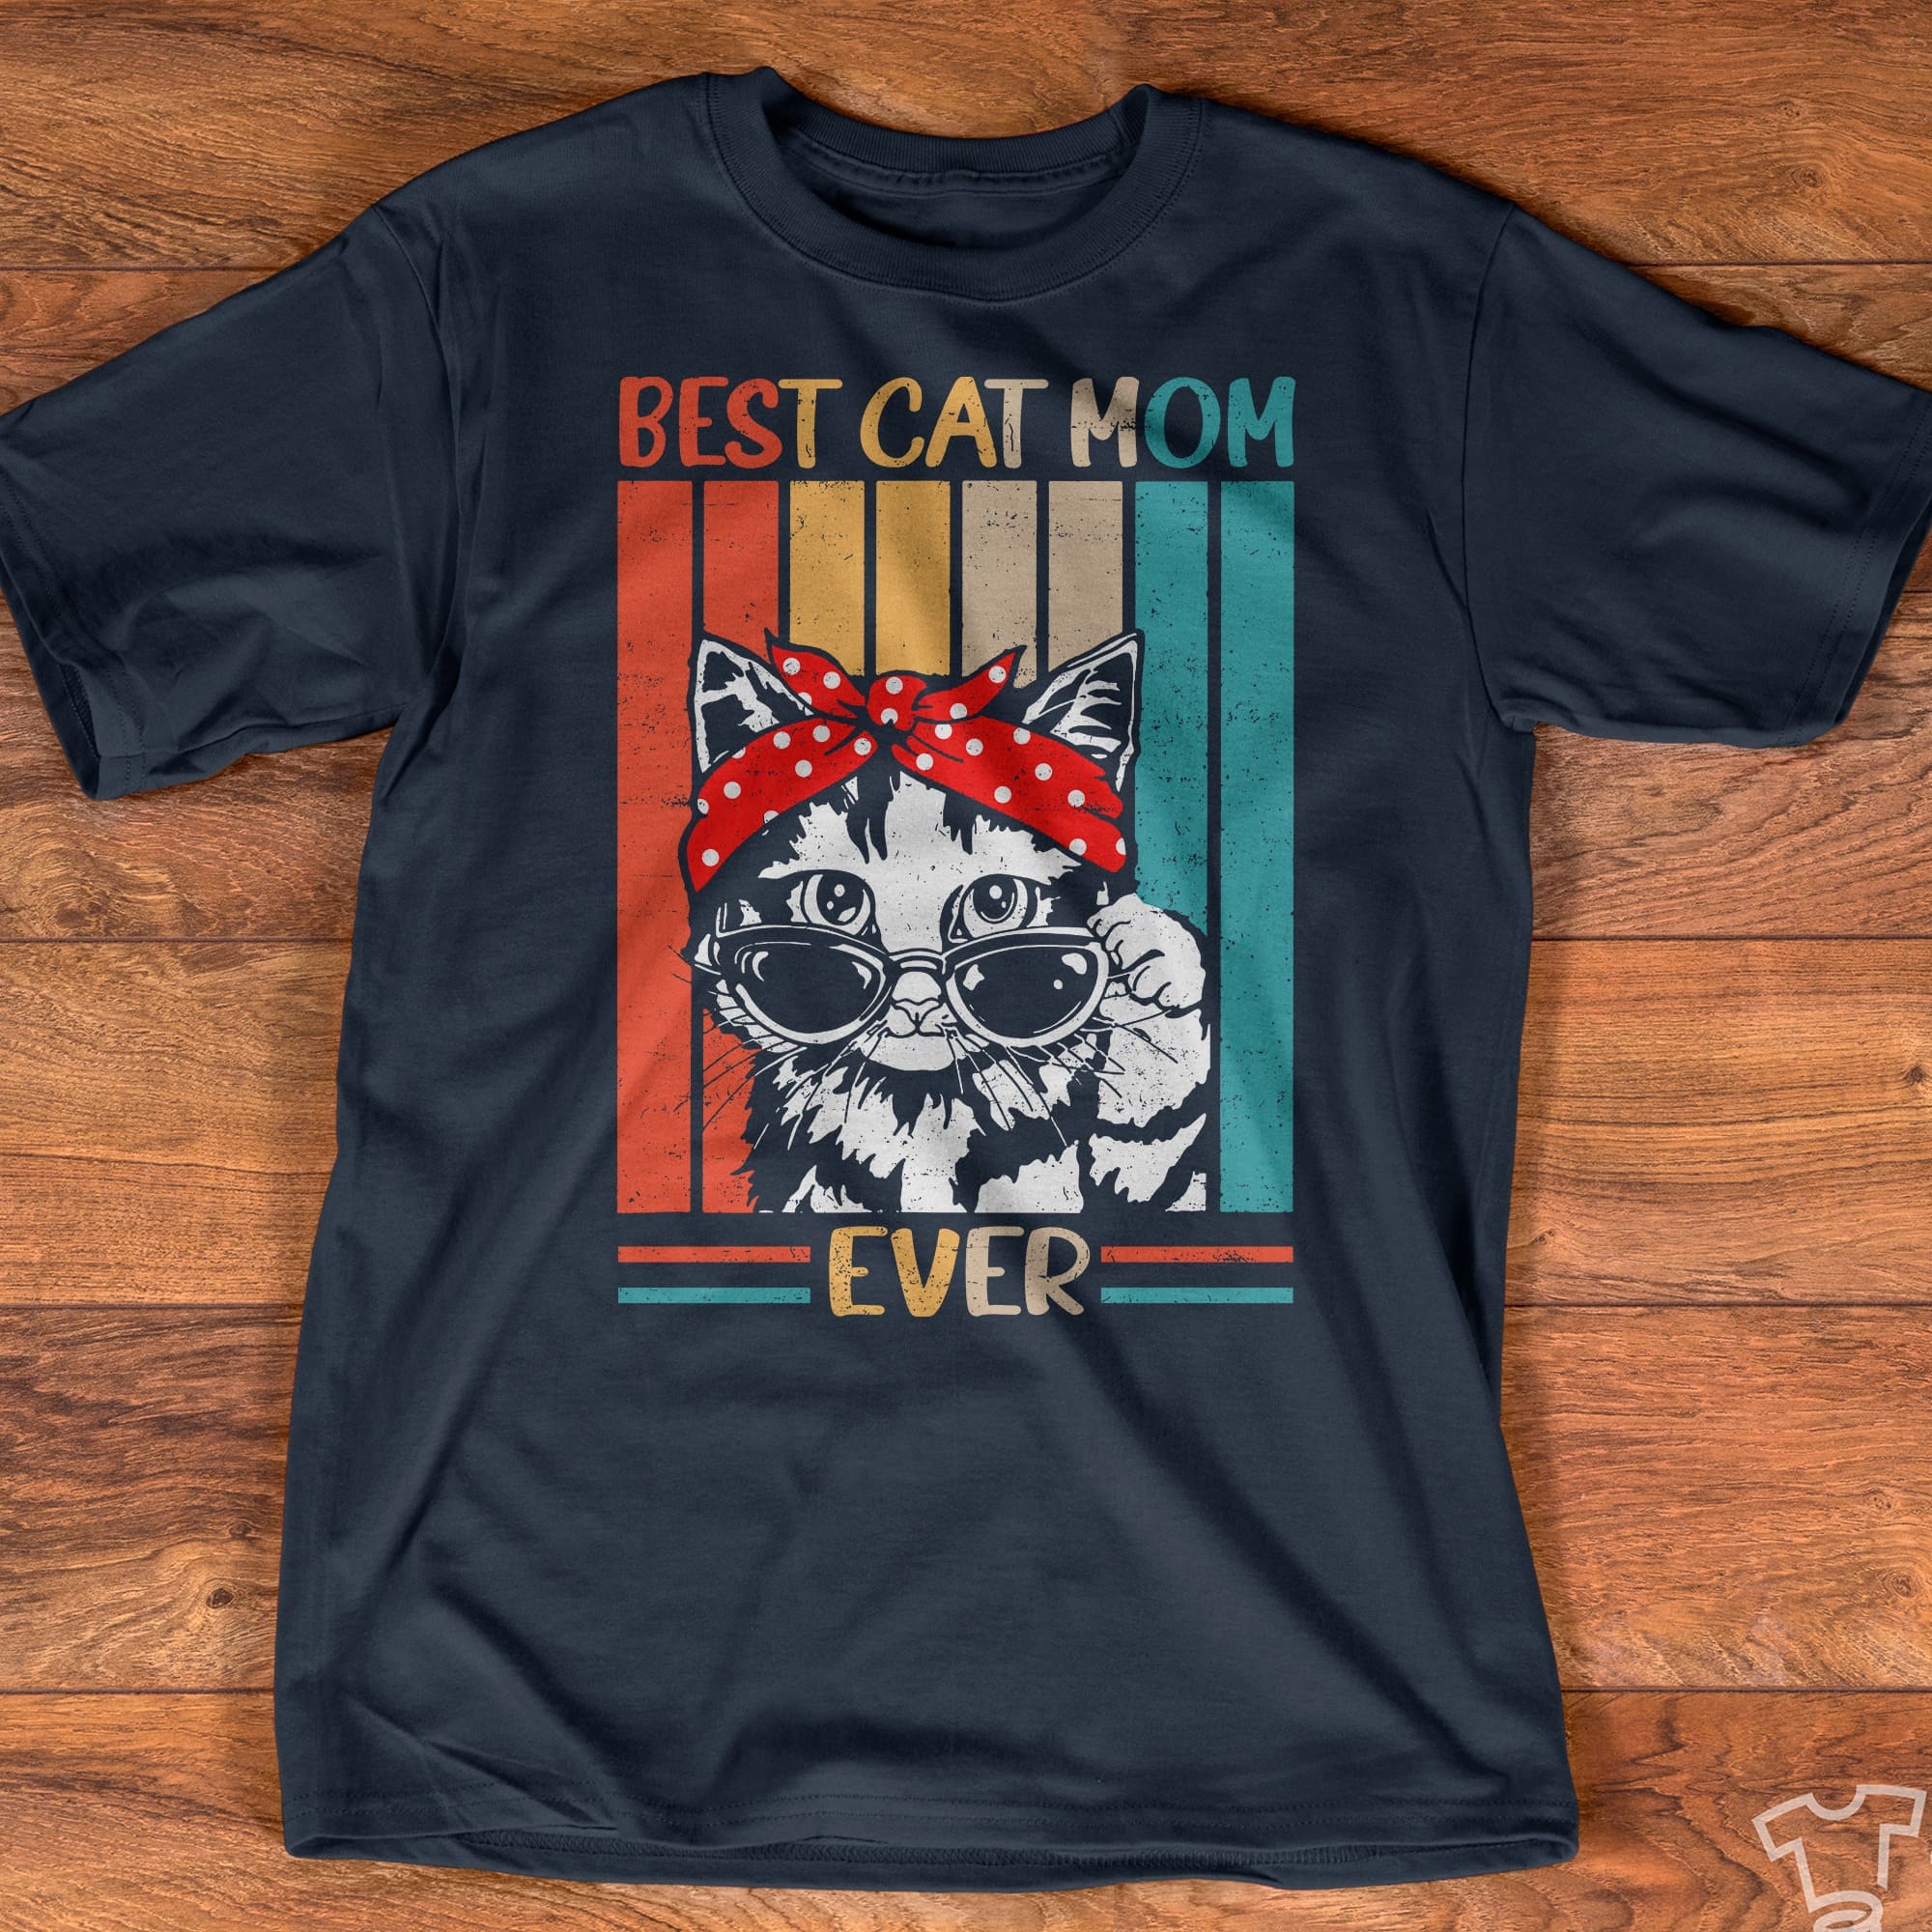 Best cat mom ever - Gorgeous kitty cat, gift for cat mom